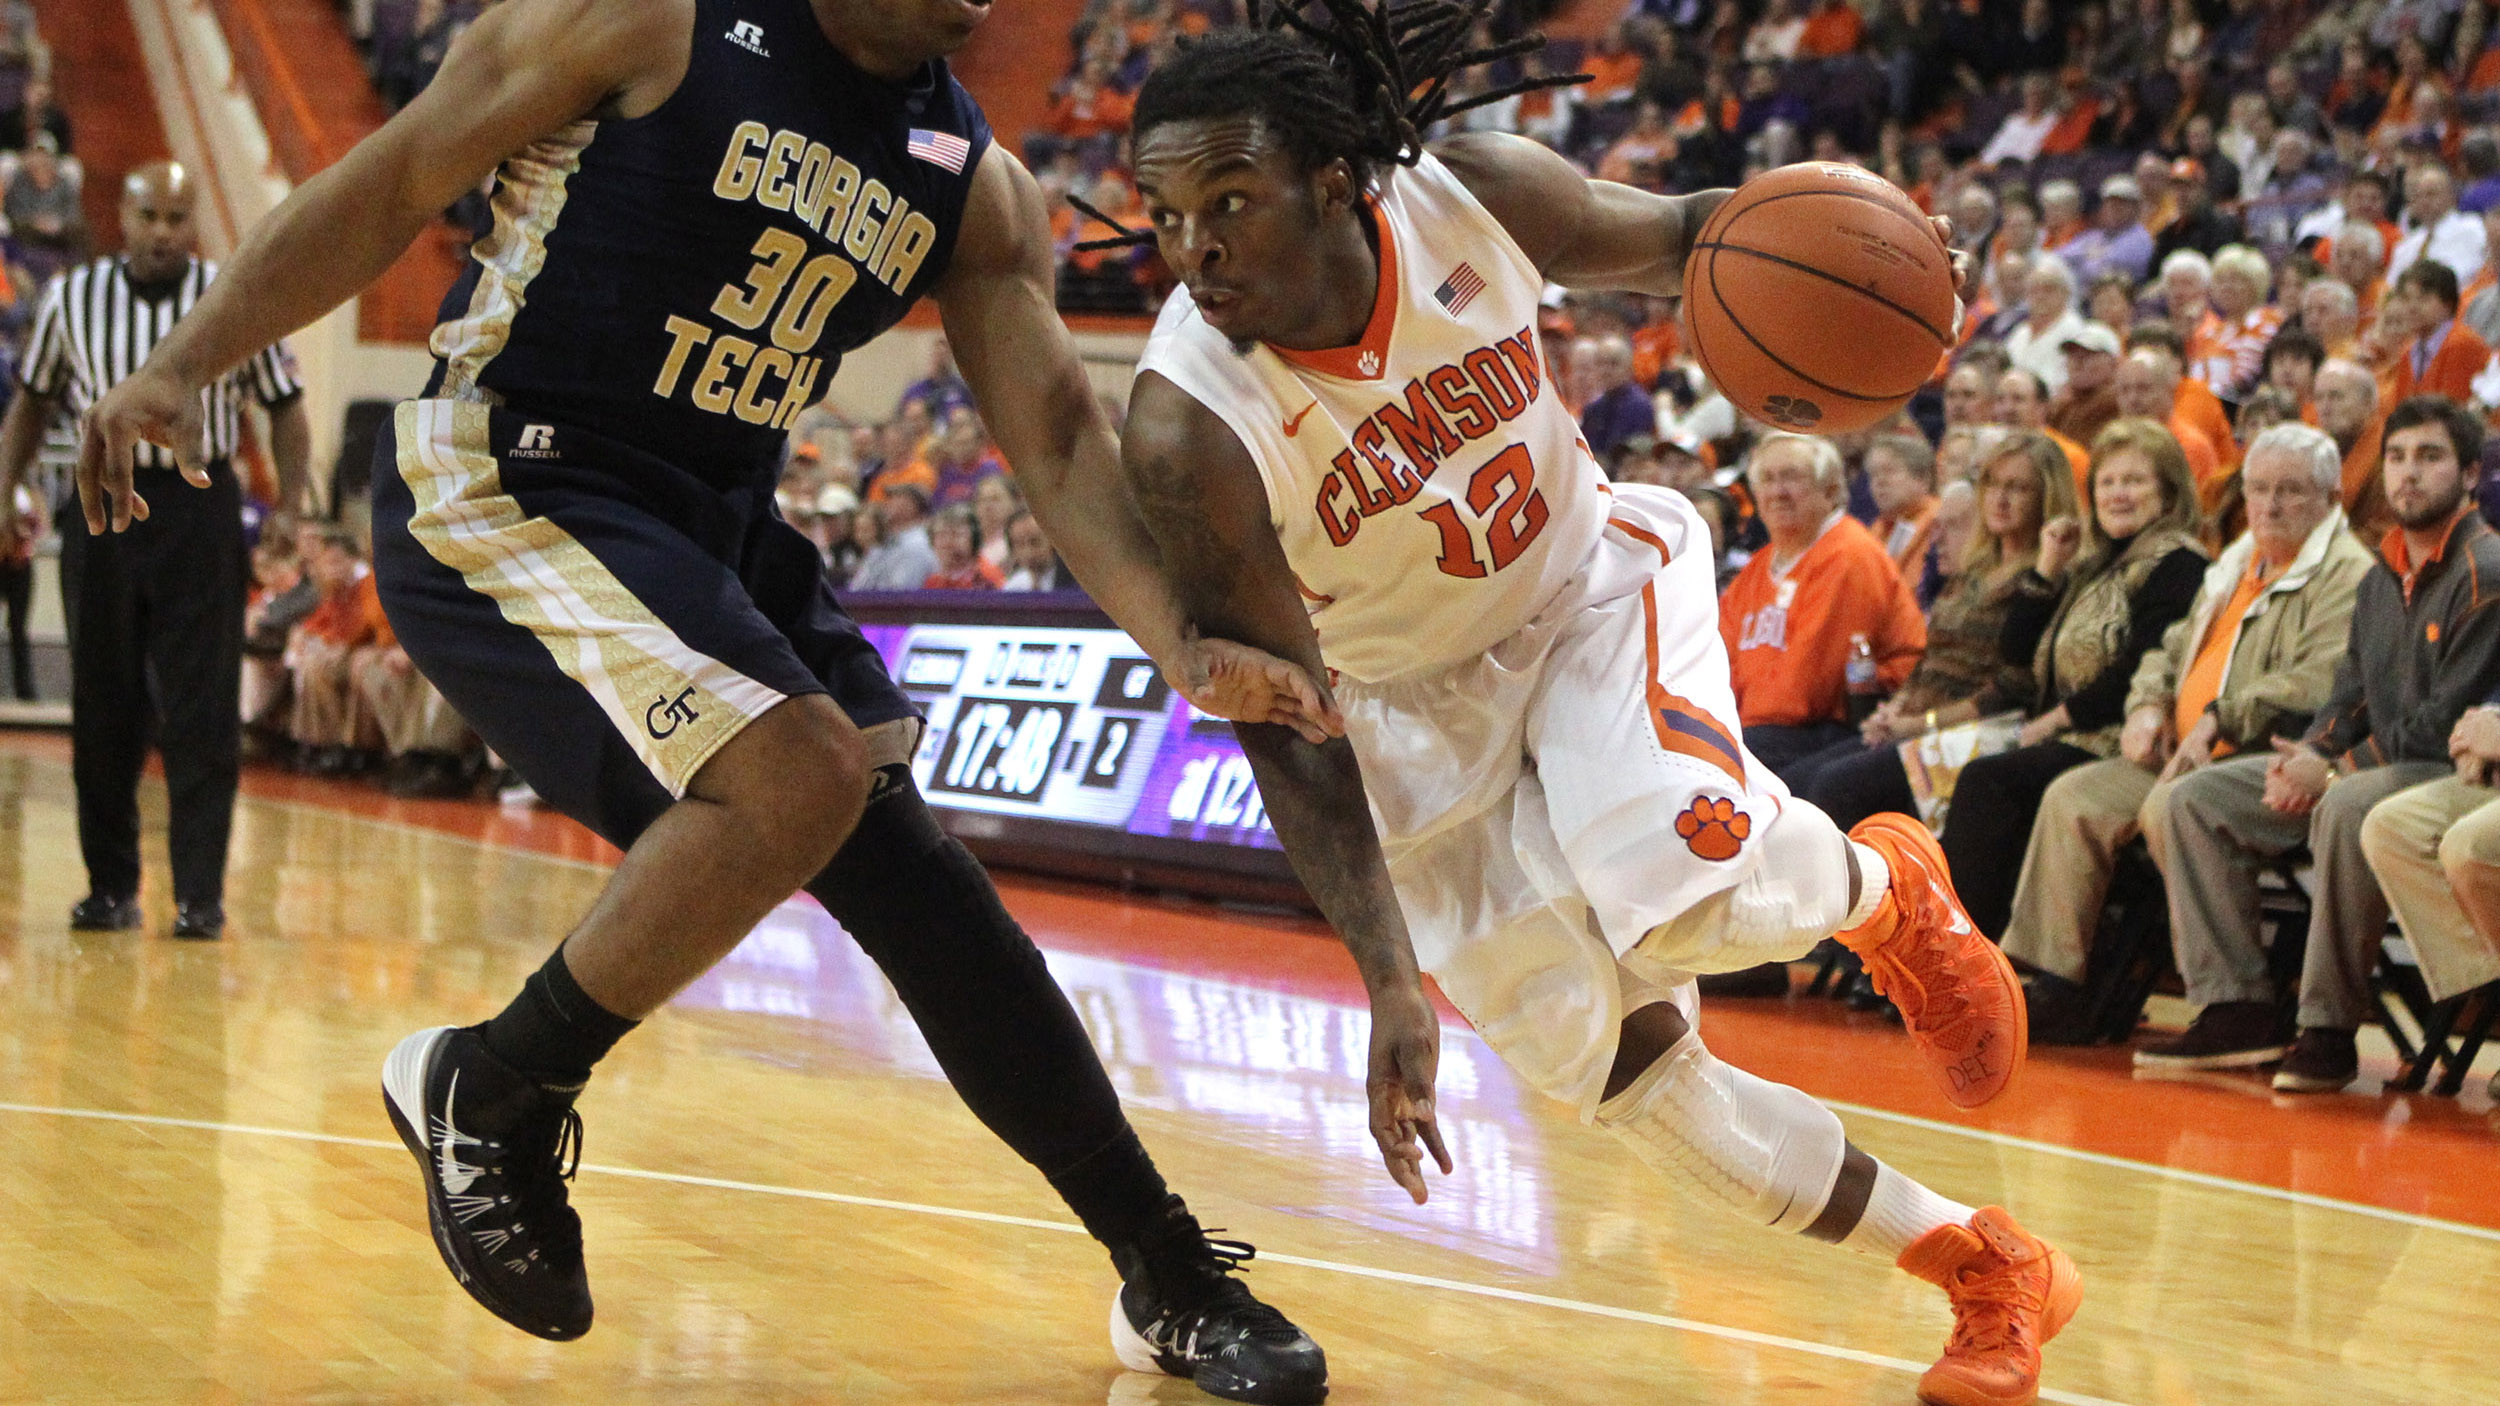 Tigers Cling to 45-41 Victory over Georgia Tech Tuesday